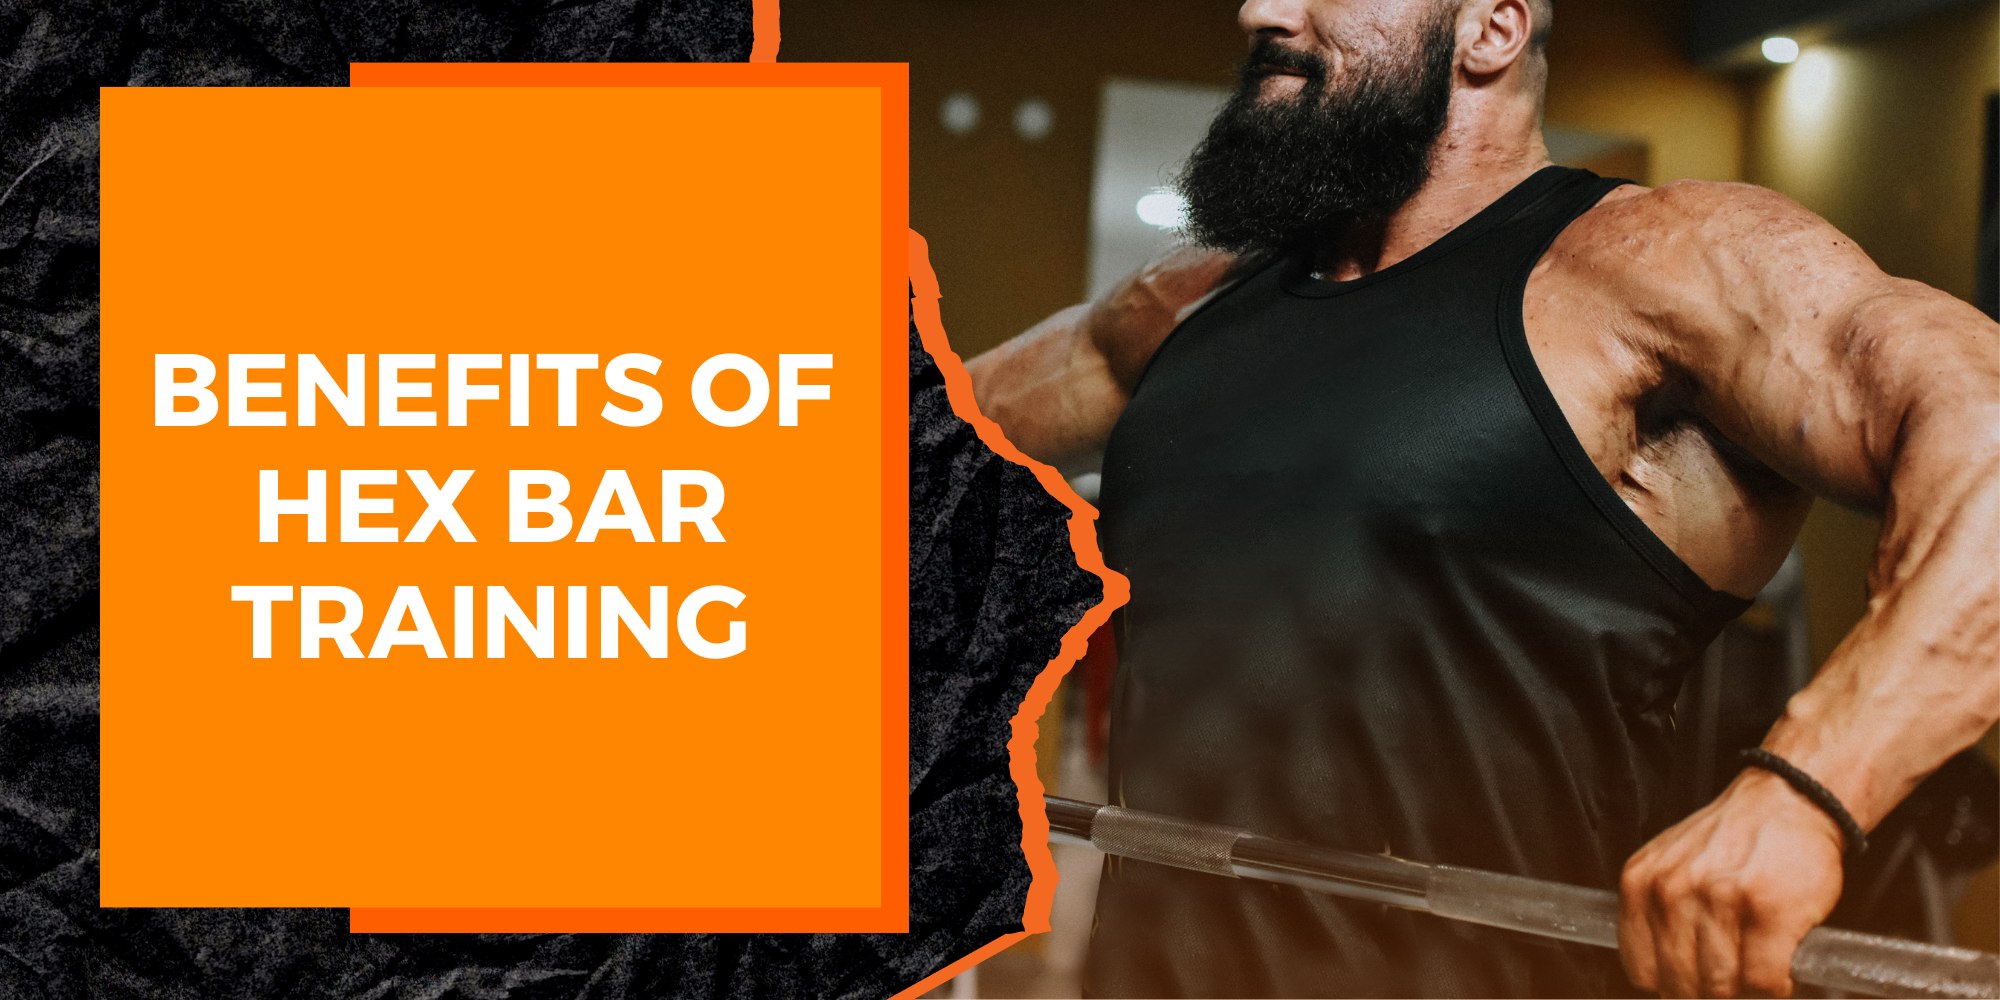 What Are the Benefits of Hex Bar Training?